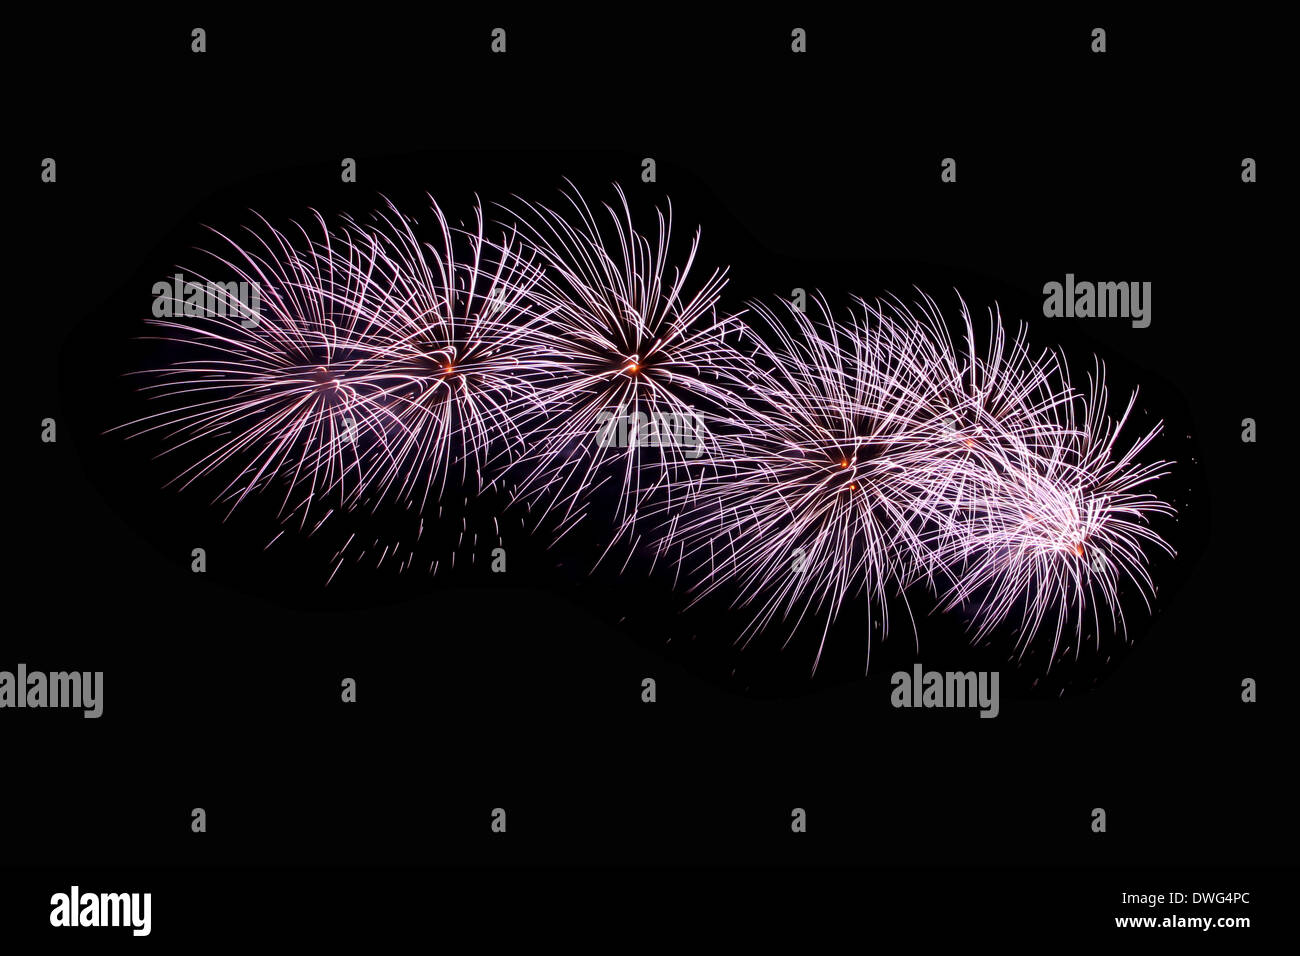 Purple Fireworks or firecracker in the darkness. Stock Photo